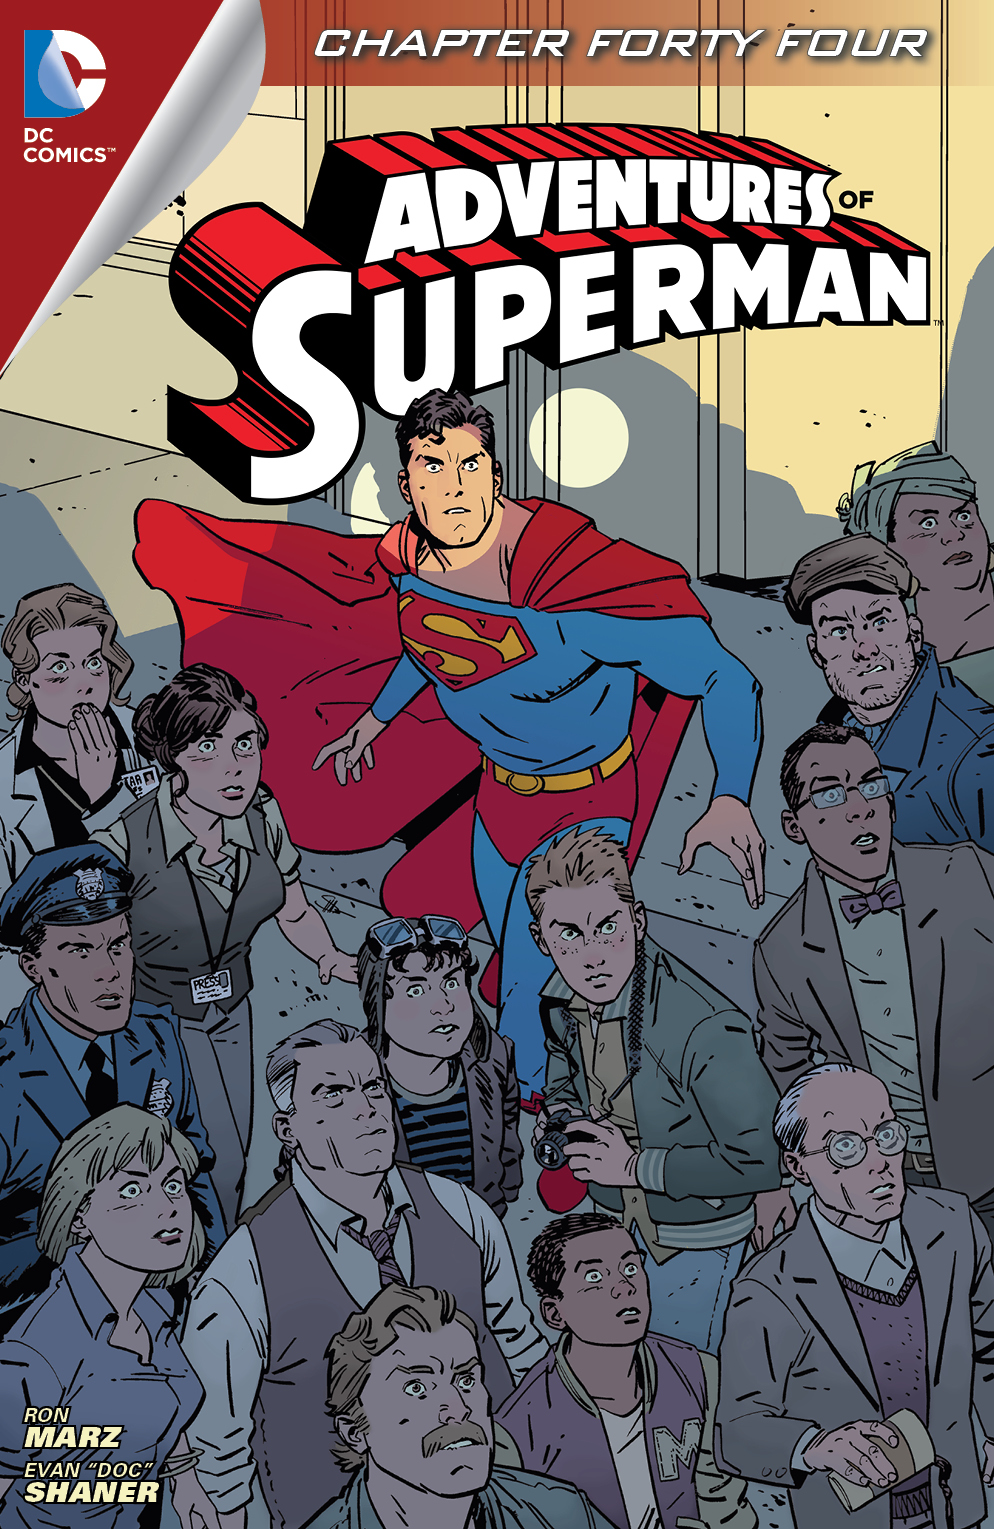 Adventures of Superman (2013-) #44 preview images